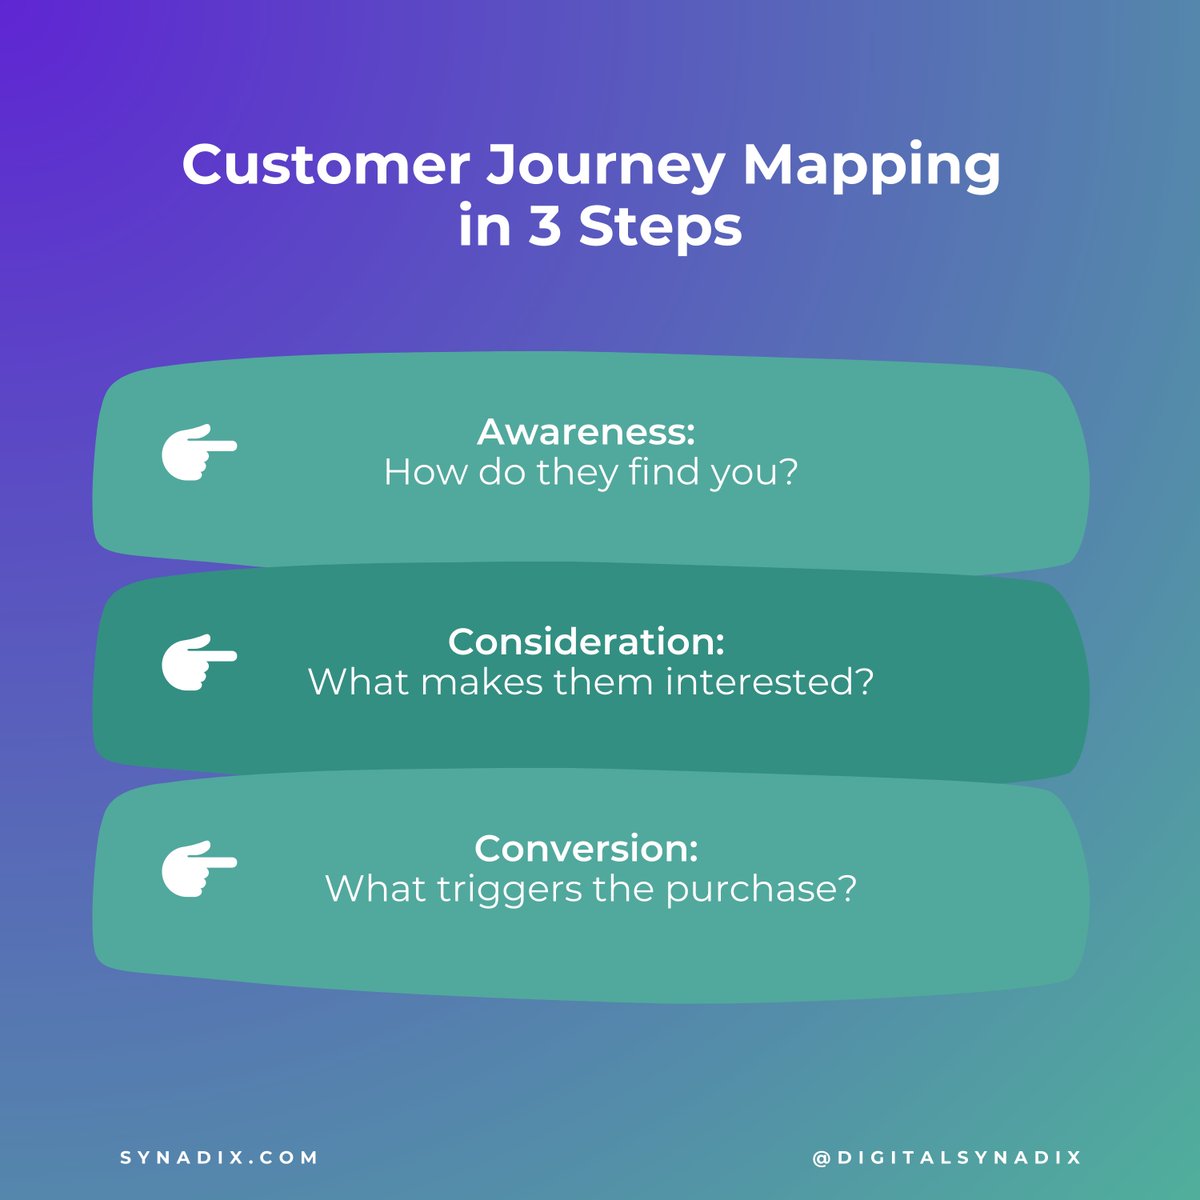 Customer Journey Mapping in 3 Steps 🗺️🛣️

1️⃣ Awareness: How do they find you? 🔍👀
2️⃣ Consideration: What makes them interested? 🤔💡
3️⃣ Conversion: What triggers the purchase? 🛒🎯

#CustomerJourney #MappingSuccess #ConversionFunnel 📈🌟